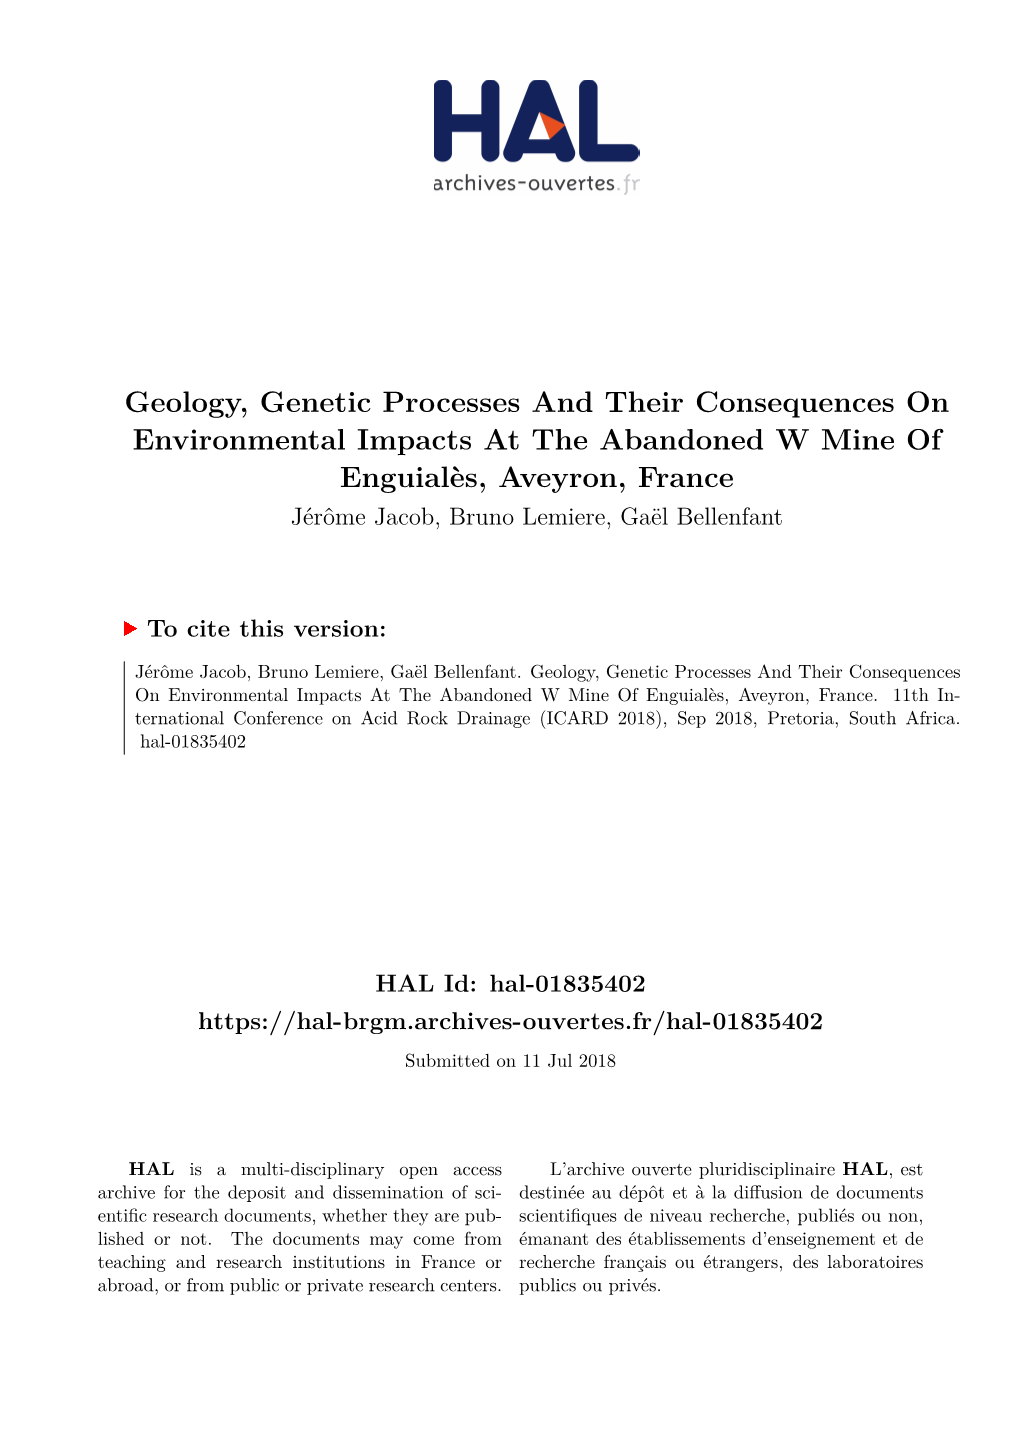 Geology, Genetic Processes and Their Consequences On